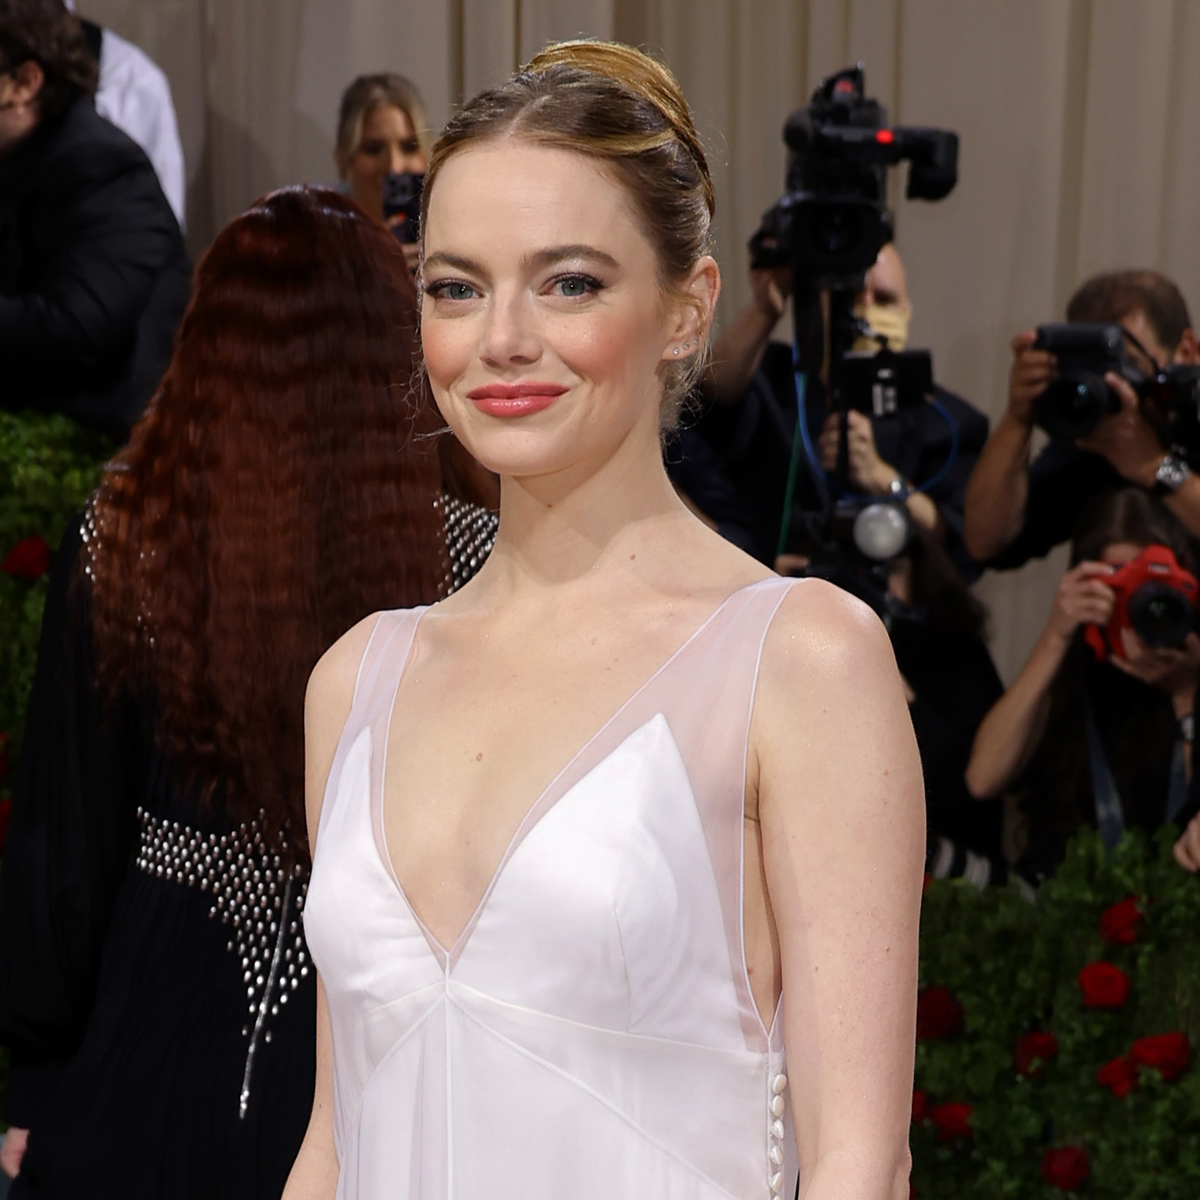 emma stone throwbacks fan account on X: Today would have been the annual # MetGala ! So here's Emma's outfit from the past Met Gala, what's your  favourite?  / X